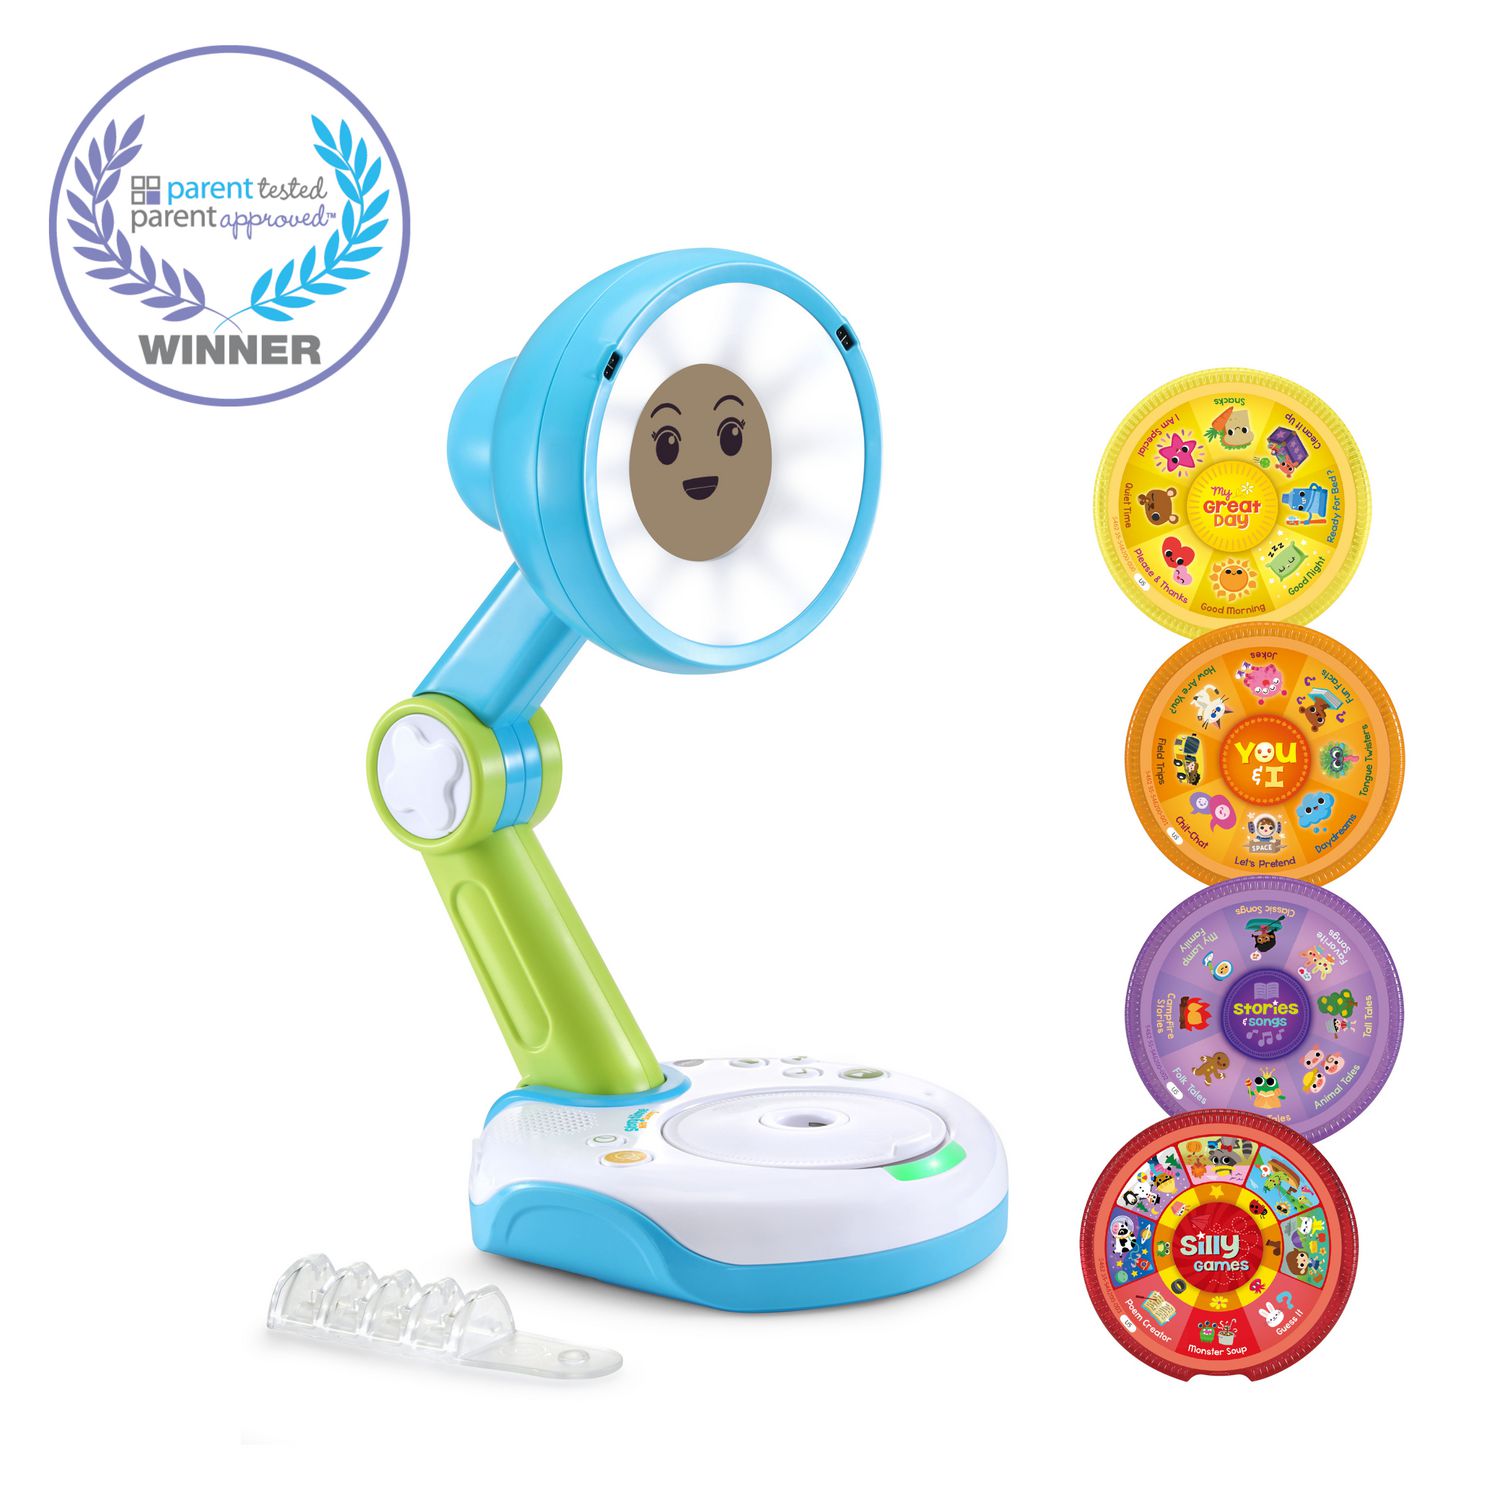 Version,　3+　Four　VTech　Activity　Sunny™　Story　Friend　English　Storytime　Telling　With　Interactive　Disks　Years